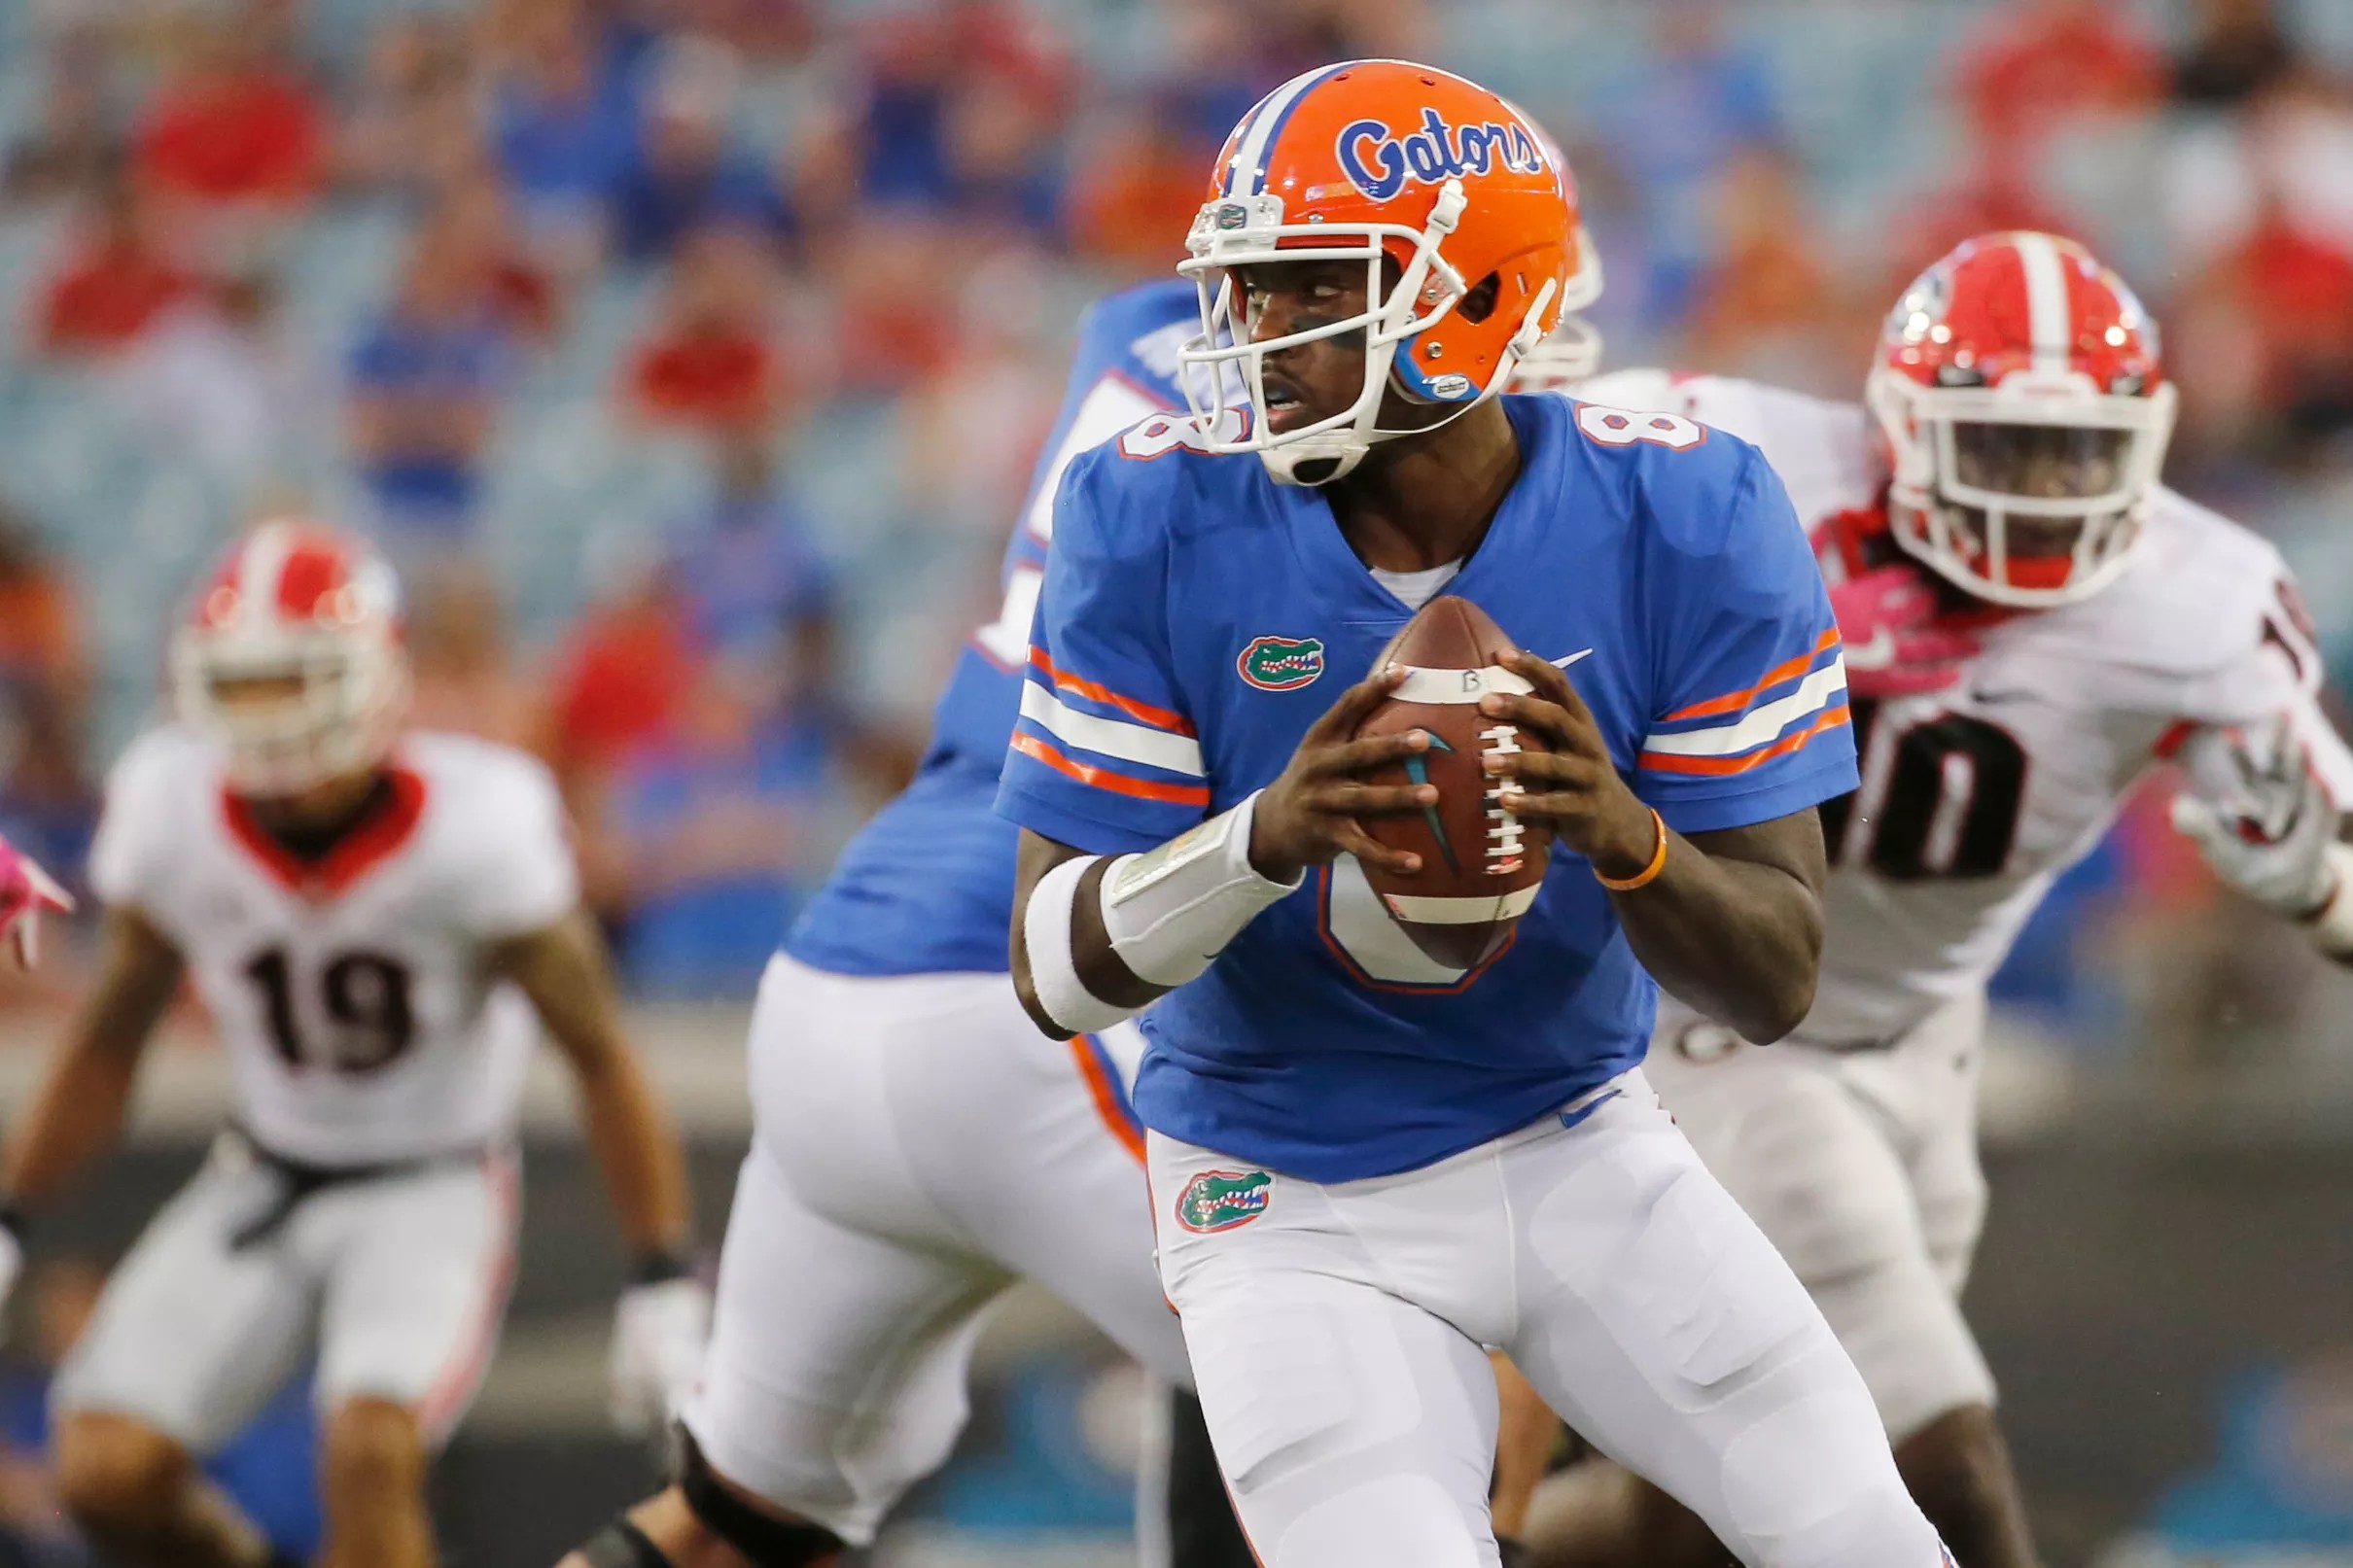 Florida vs. Missouri, Preview What can the Gators show?